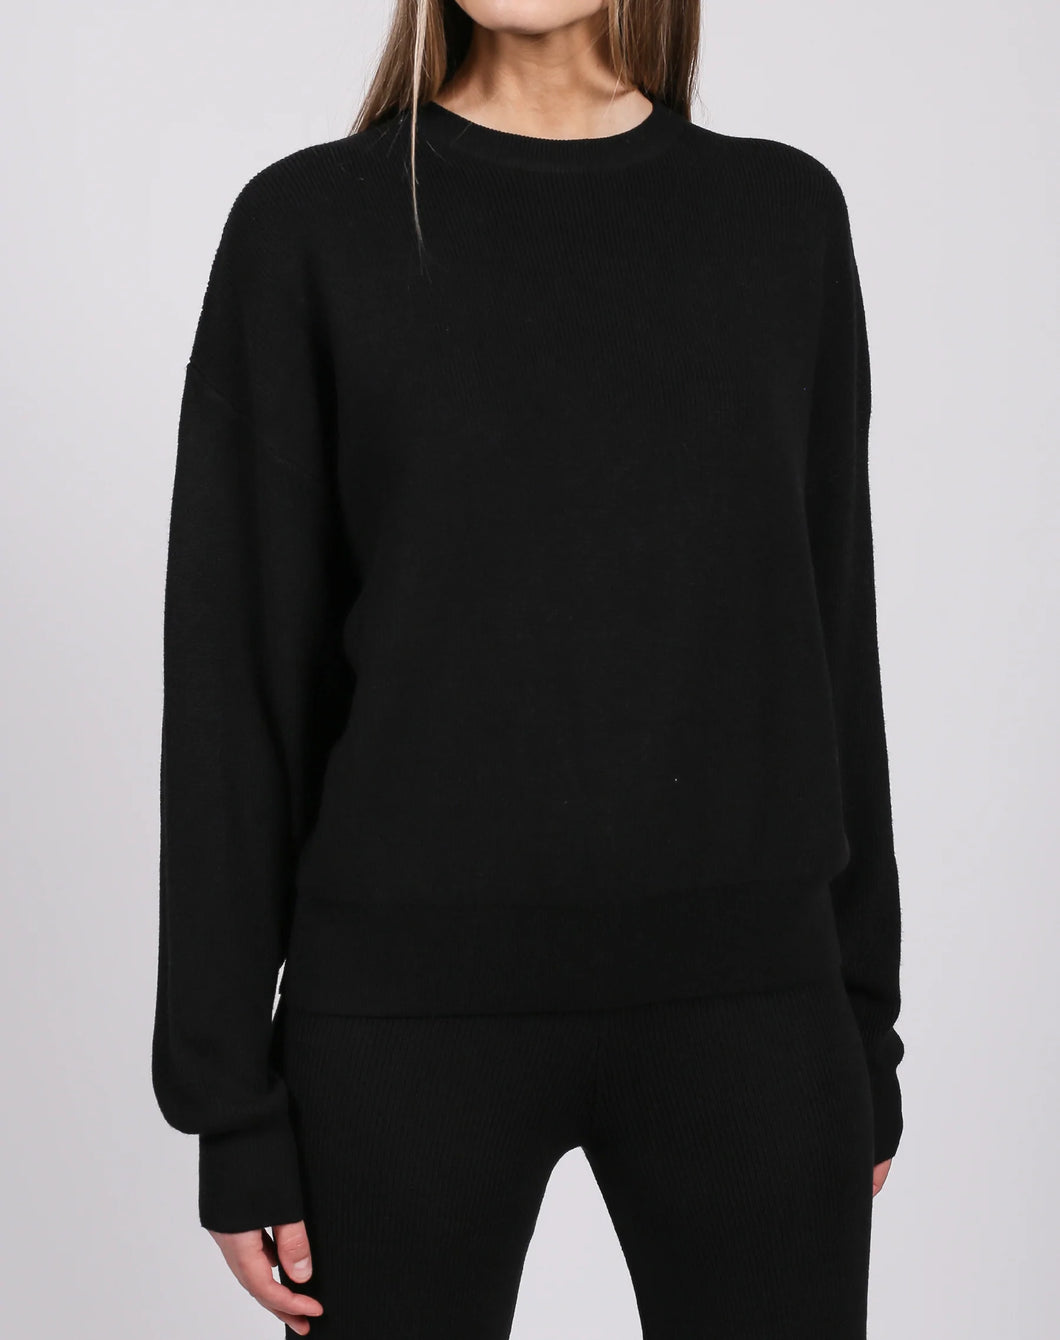 Brunette The Label Ribbed Crew Neck Sweater